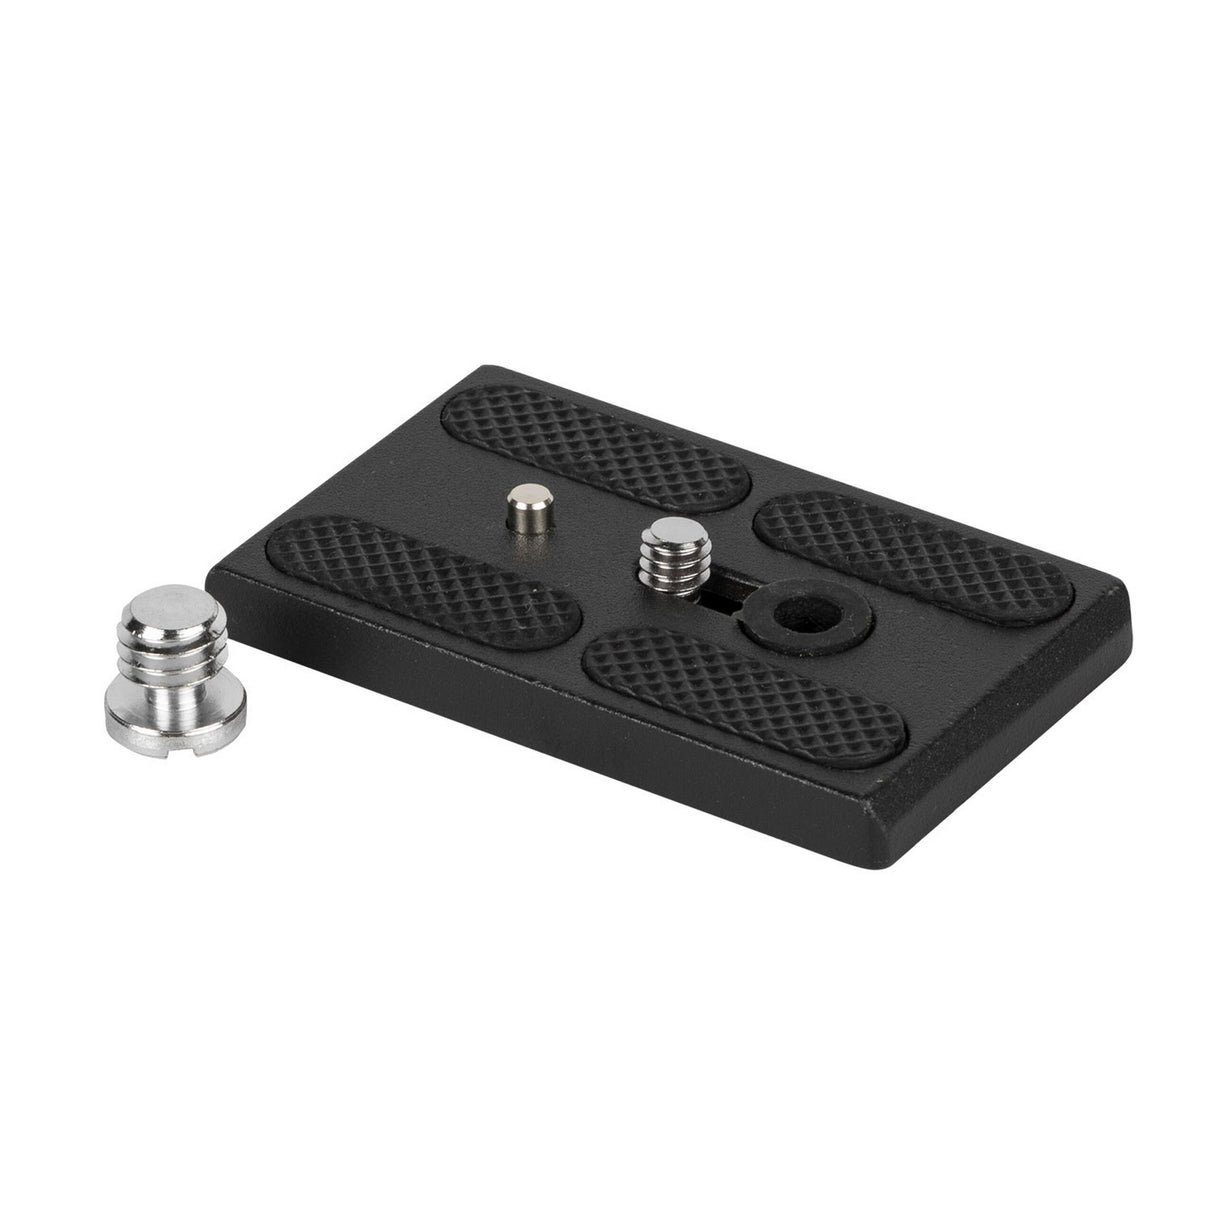 E-Image P5 Quick Release Plate for EI-7050H/GH01